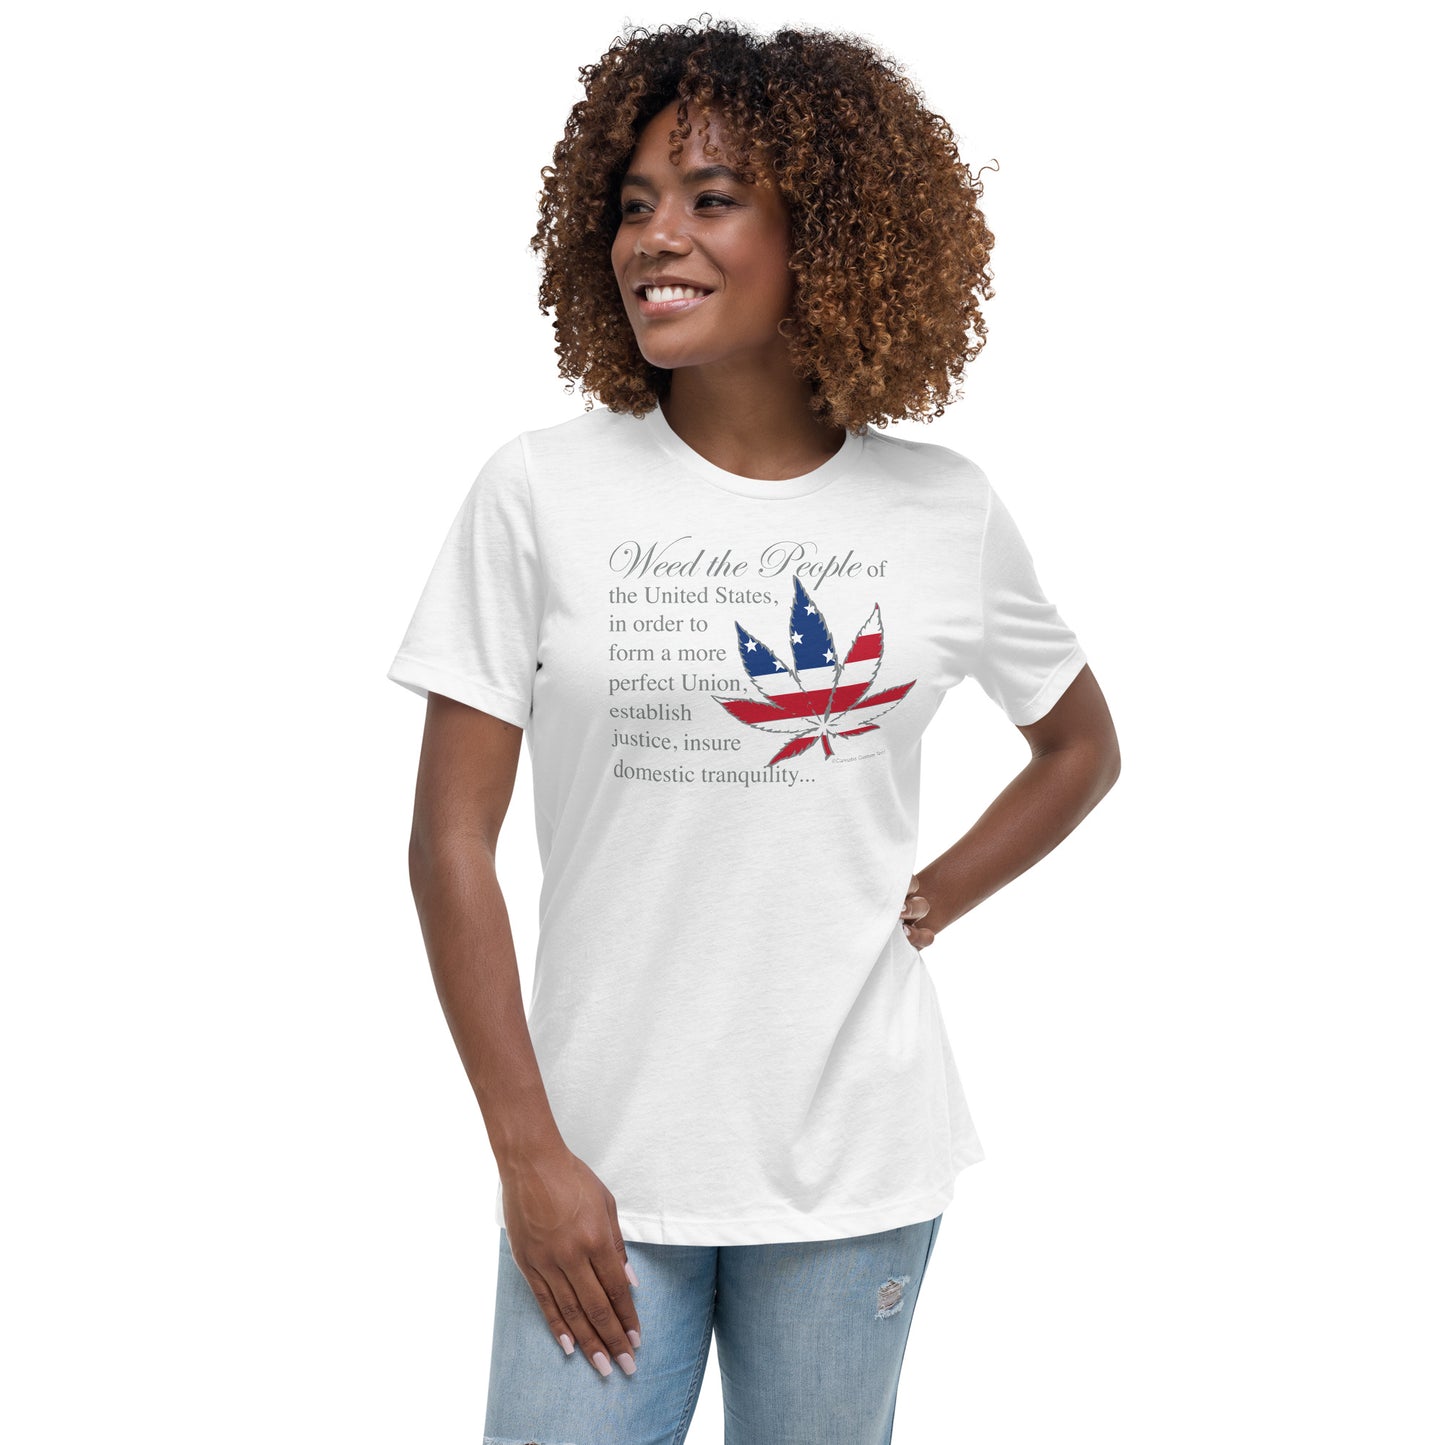 Weed the People P425 Women's Relaxed T-Shirt